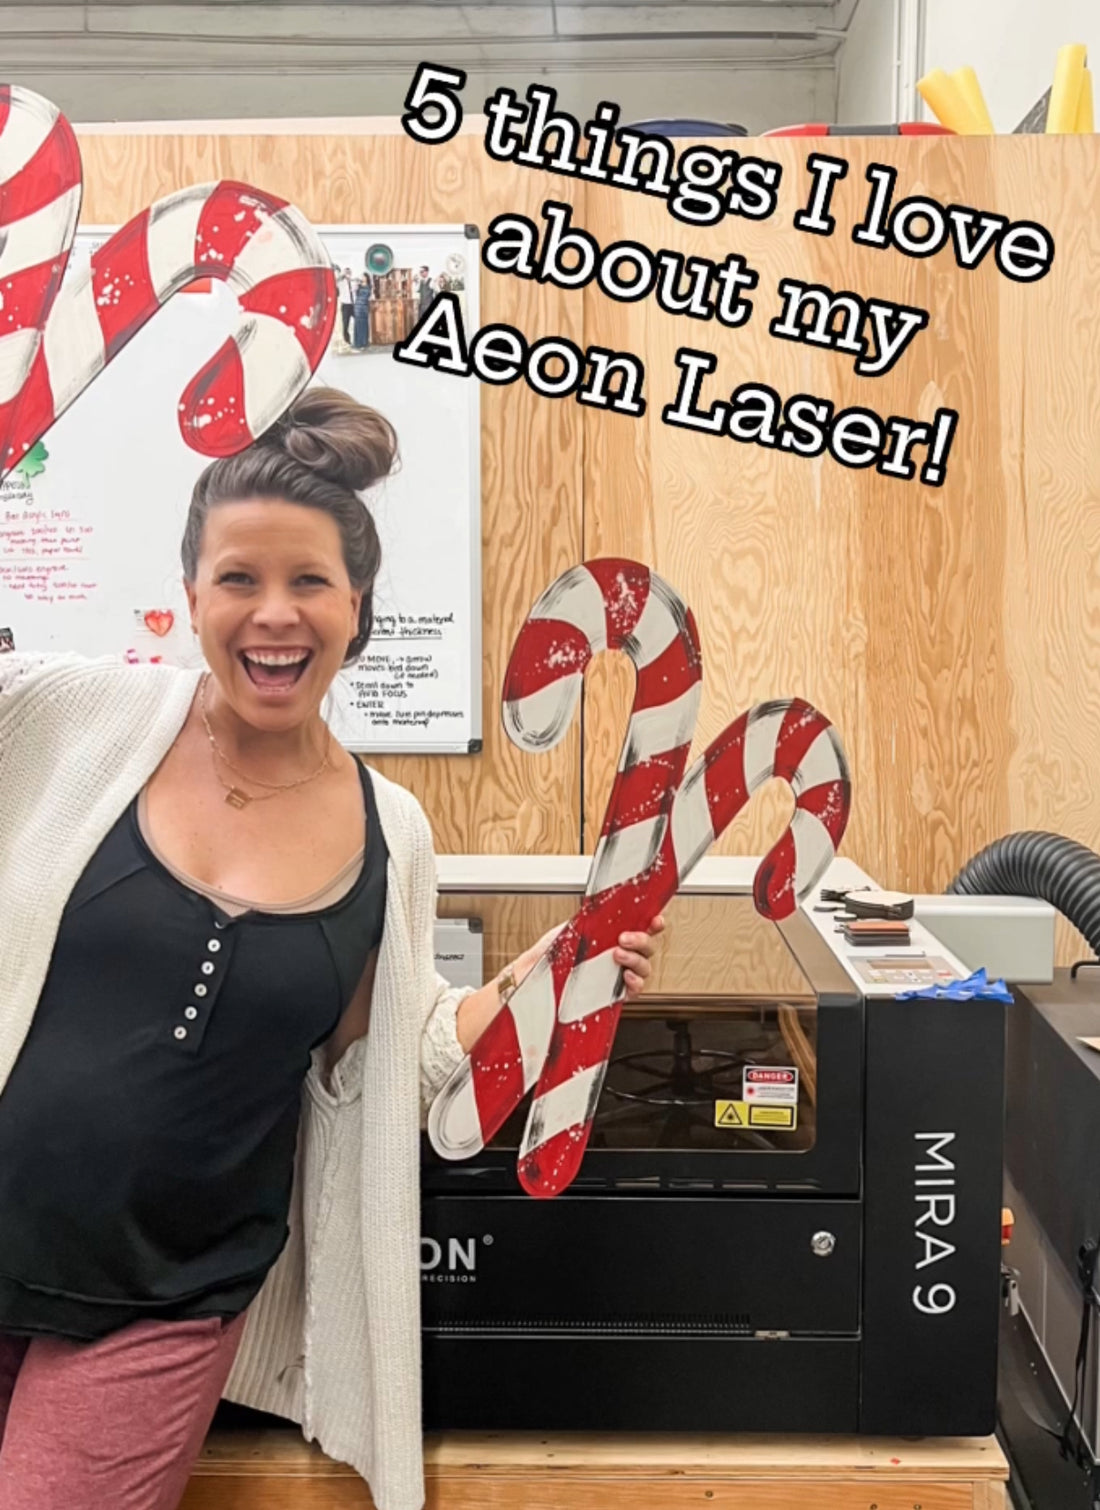 5 things I love about my Aeon Laser!